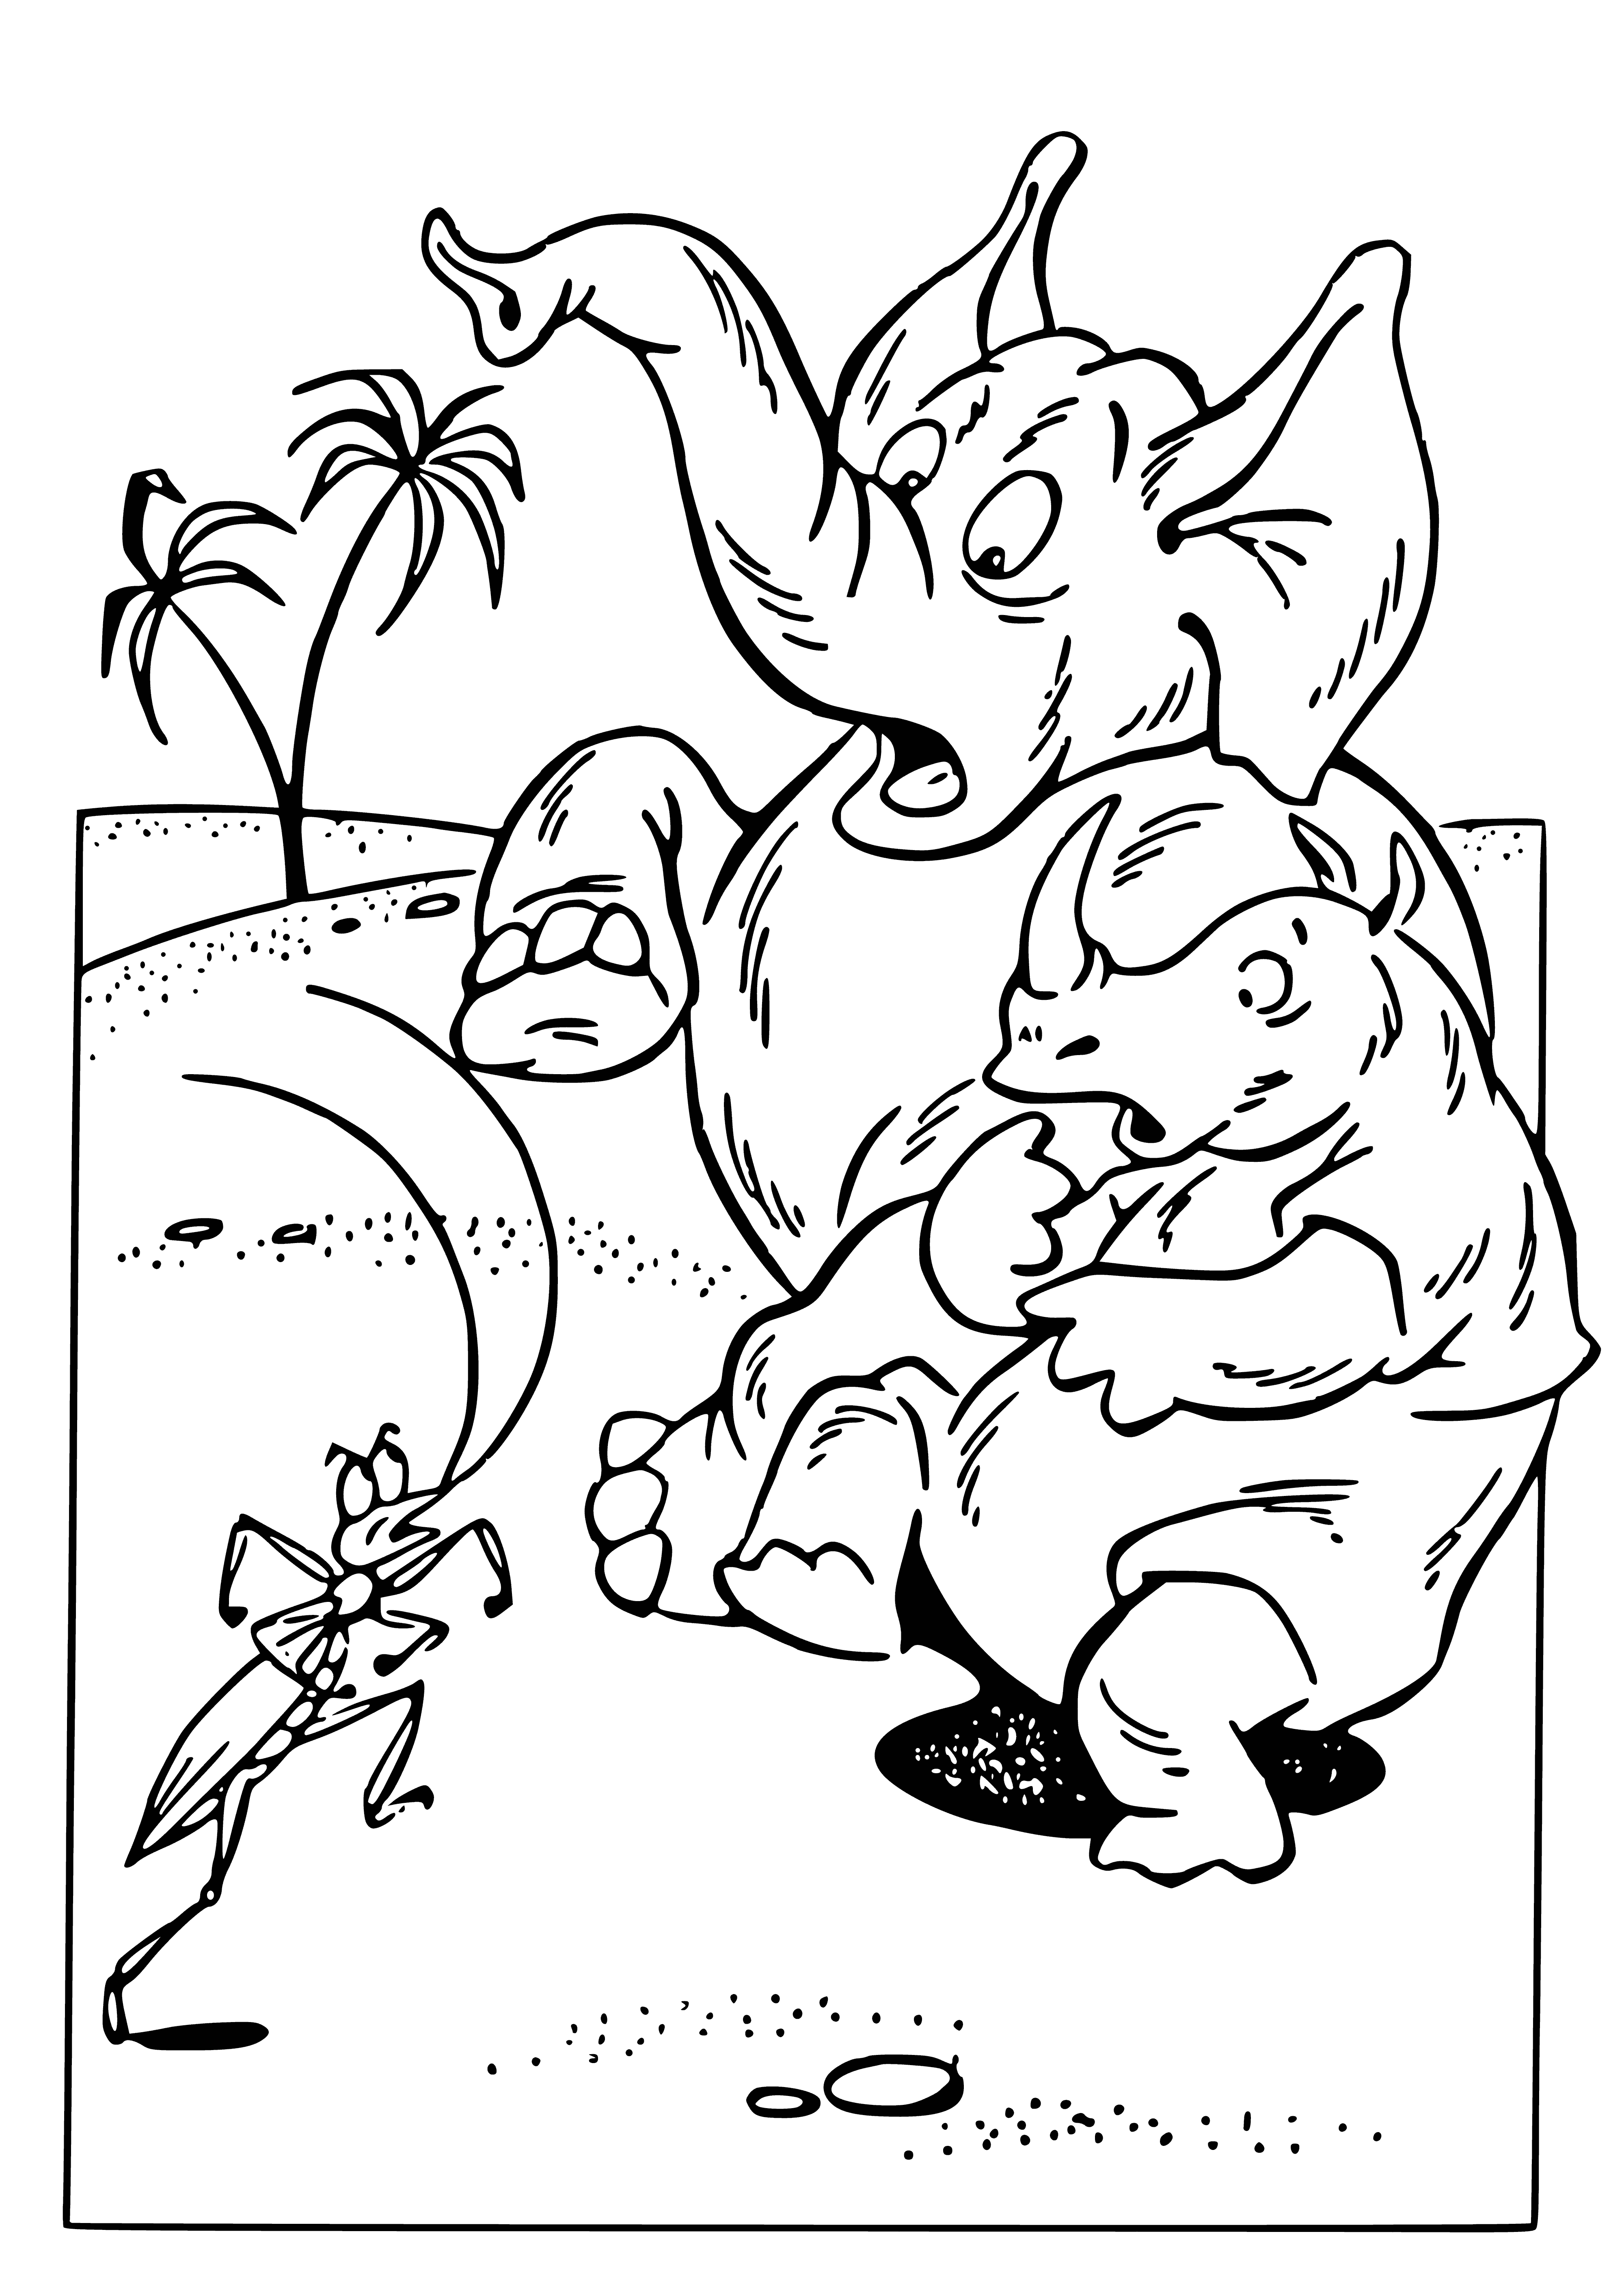 coloring page: A large cockroach eats pieces of food surrounded by a white plate and knife/fork.